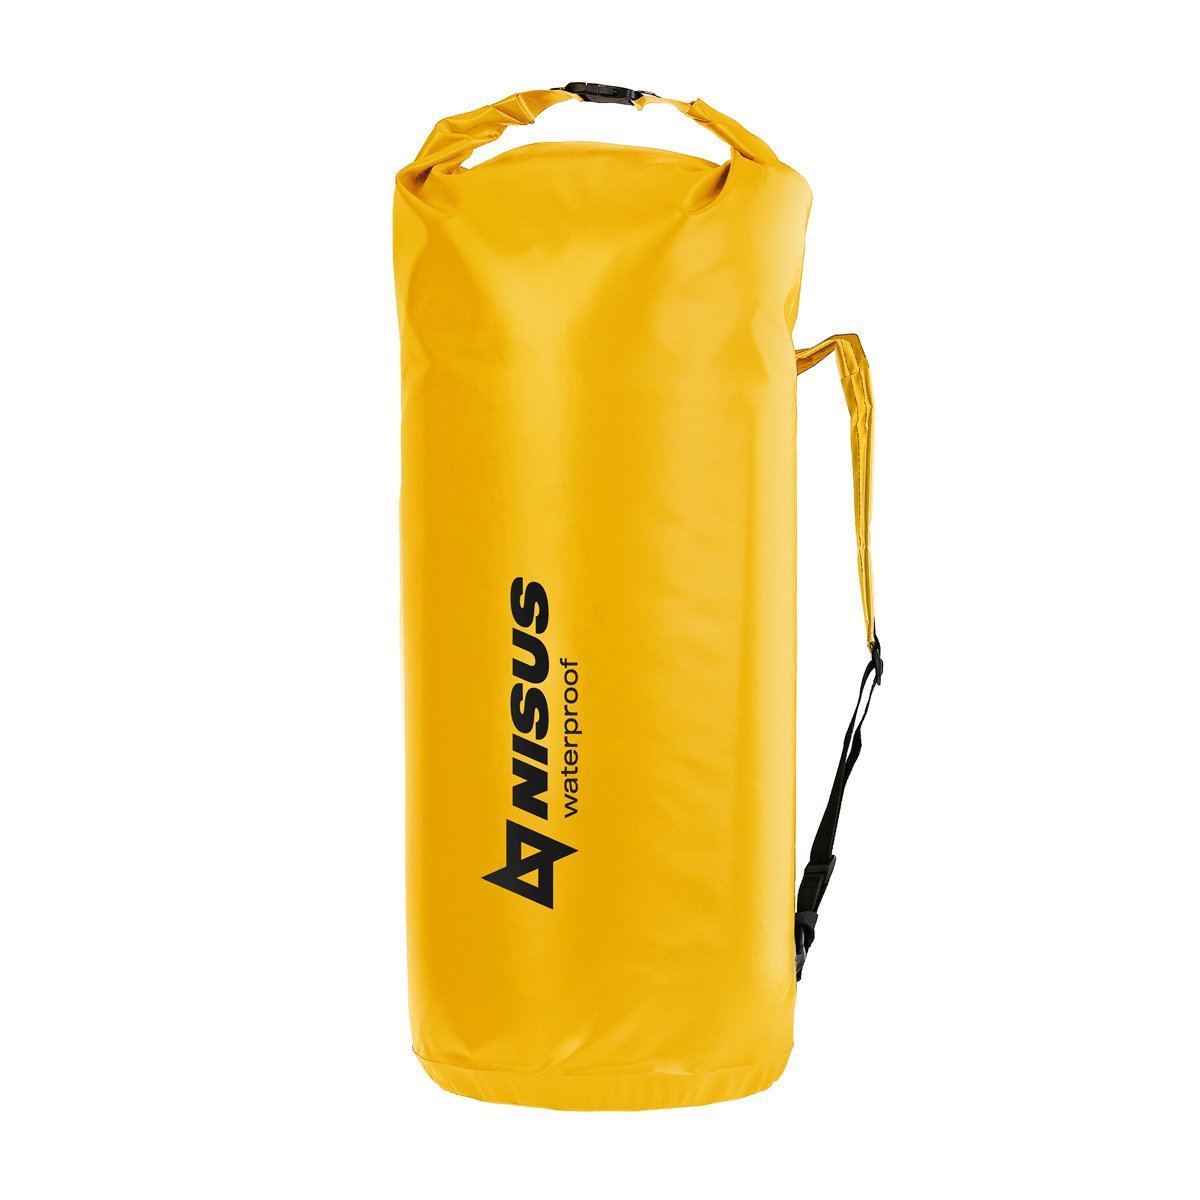 70L Waterproof Large Dry Bag, Backpack with Shoulder Straps, Yellow